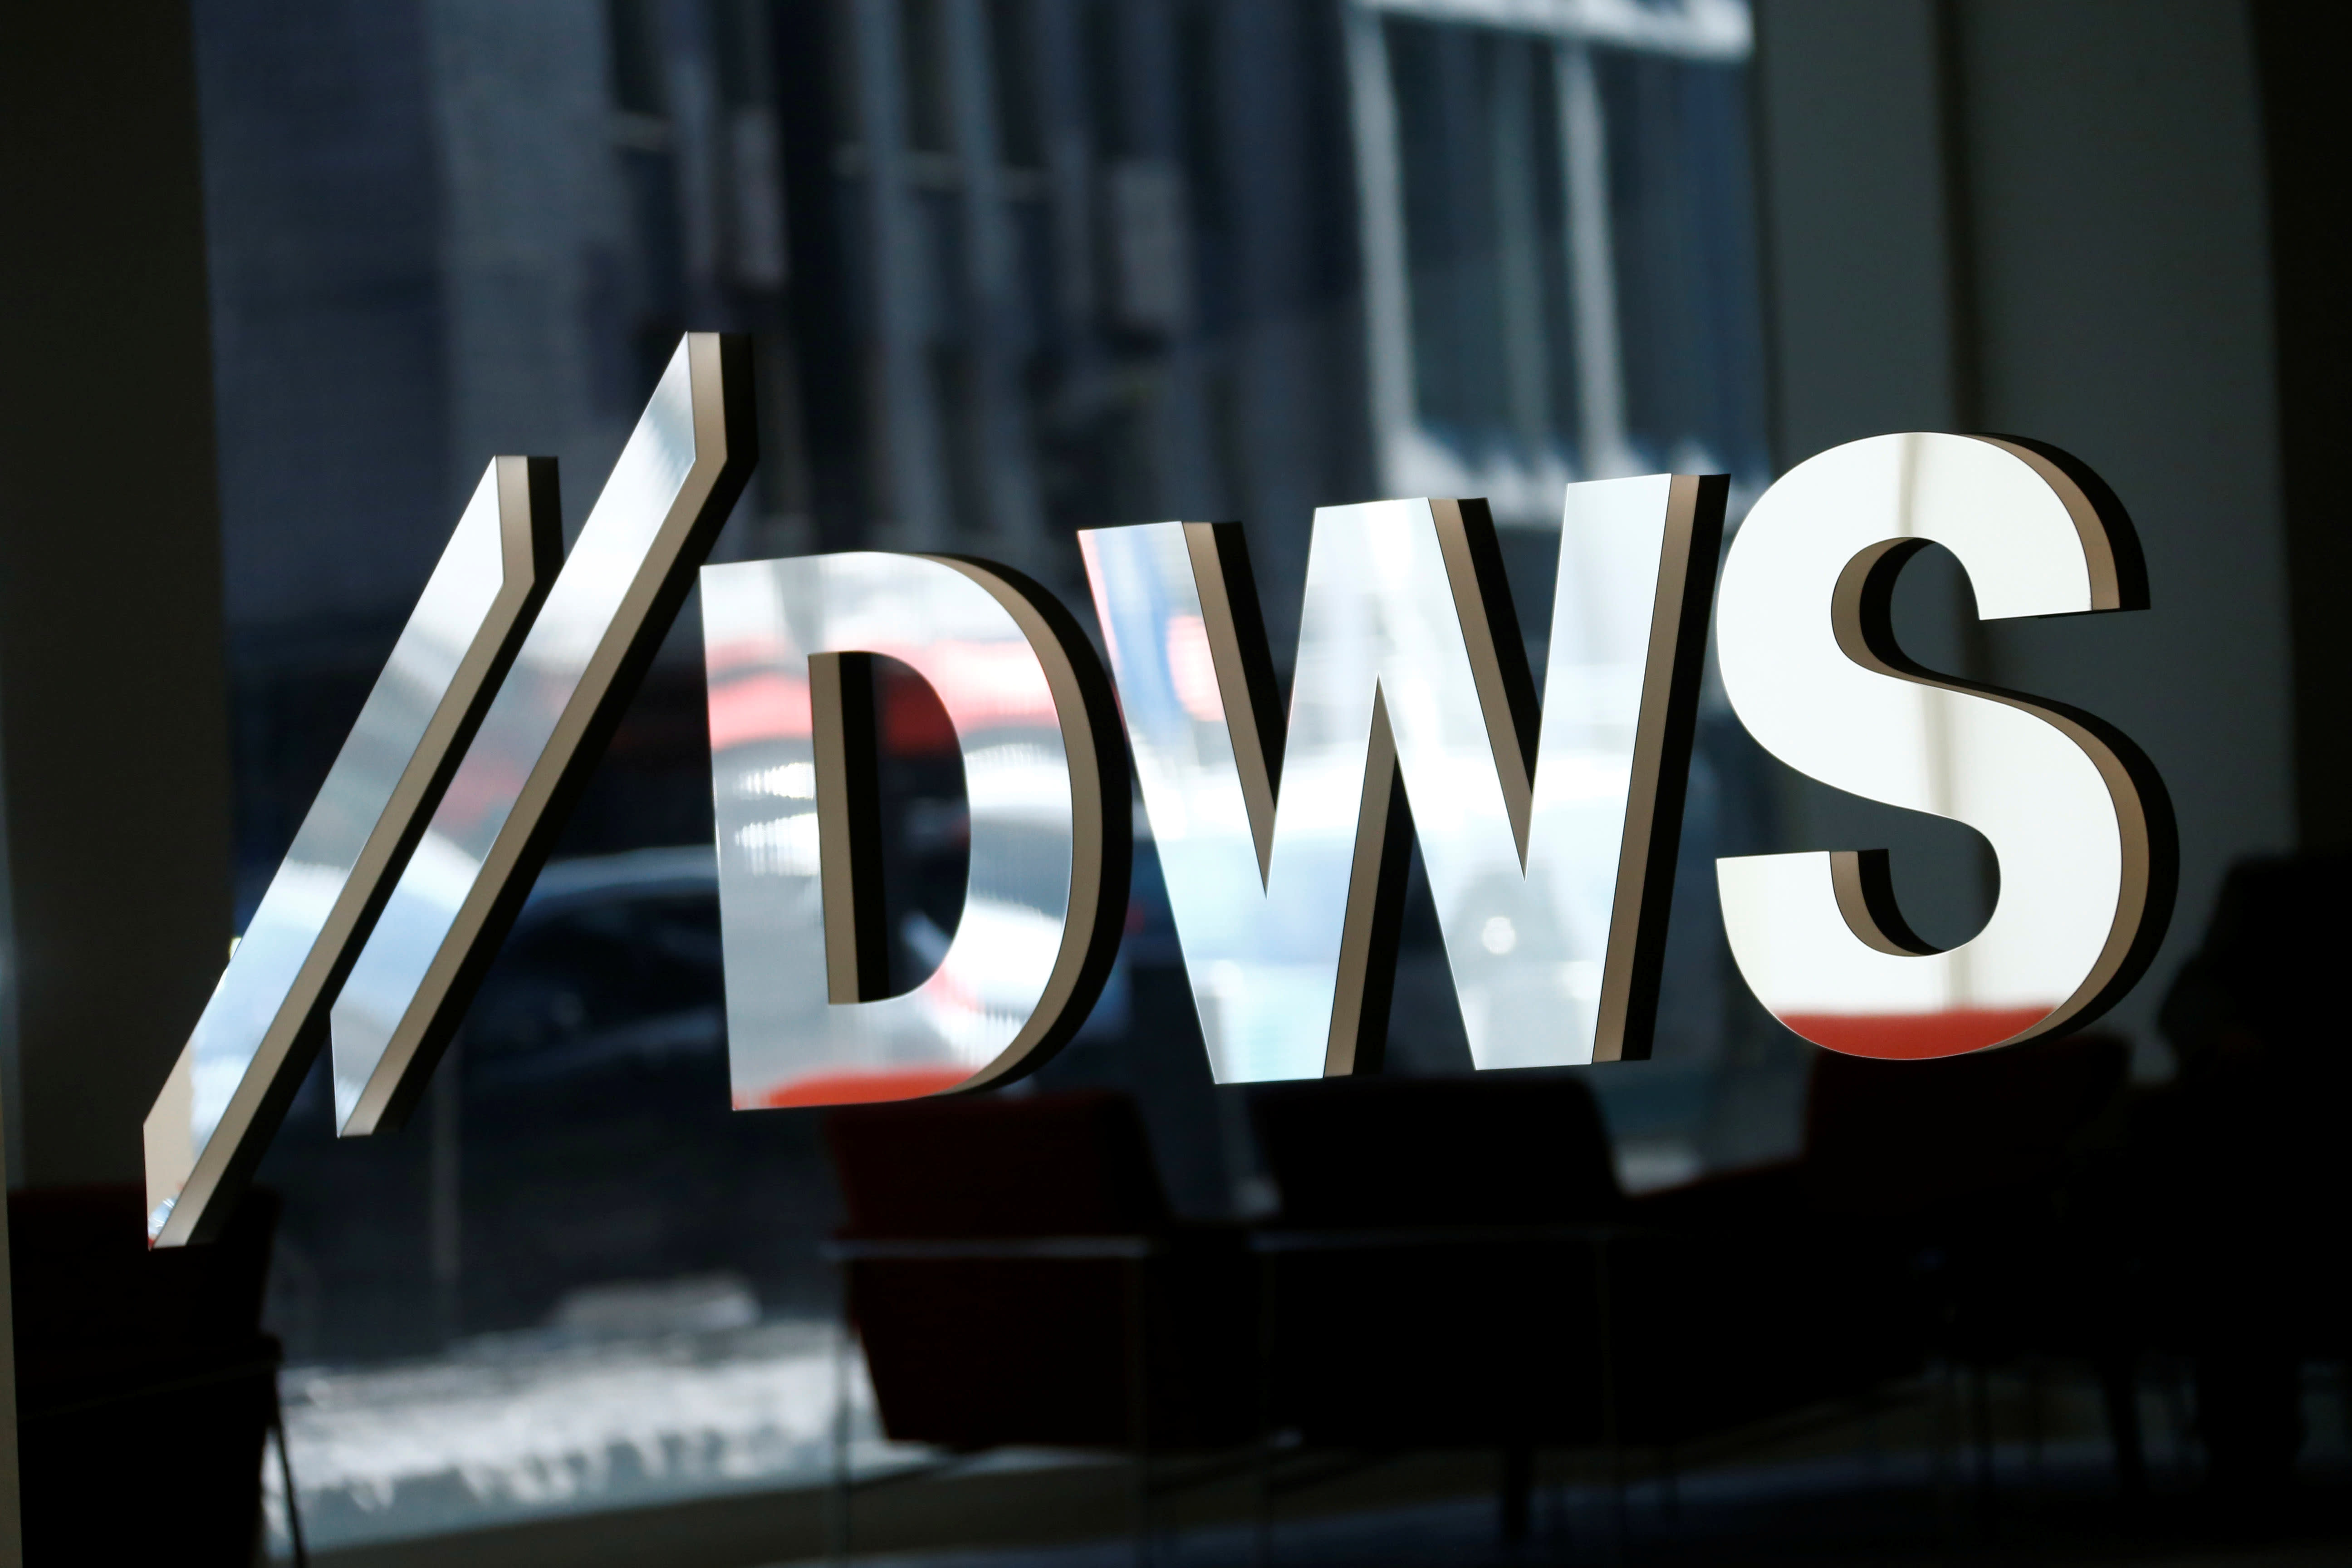 US authorities investigating Deutsche Banks DWS Group over sustainable investing claims: WSJ